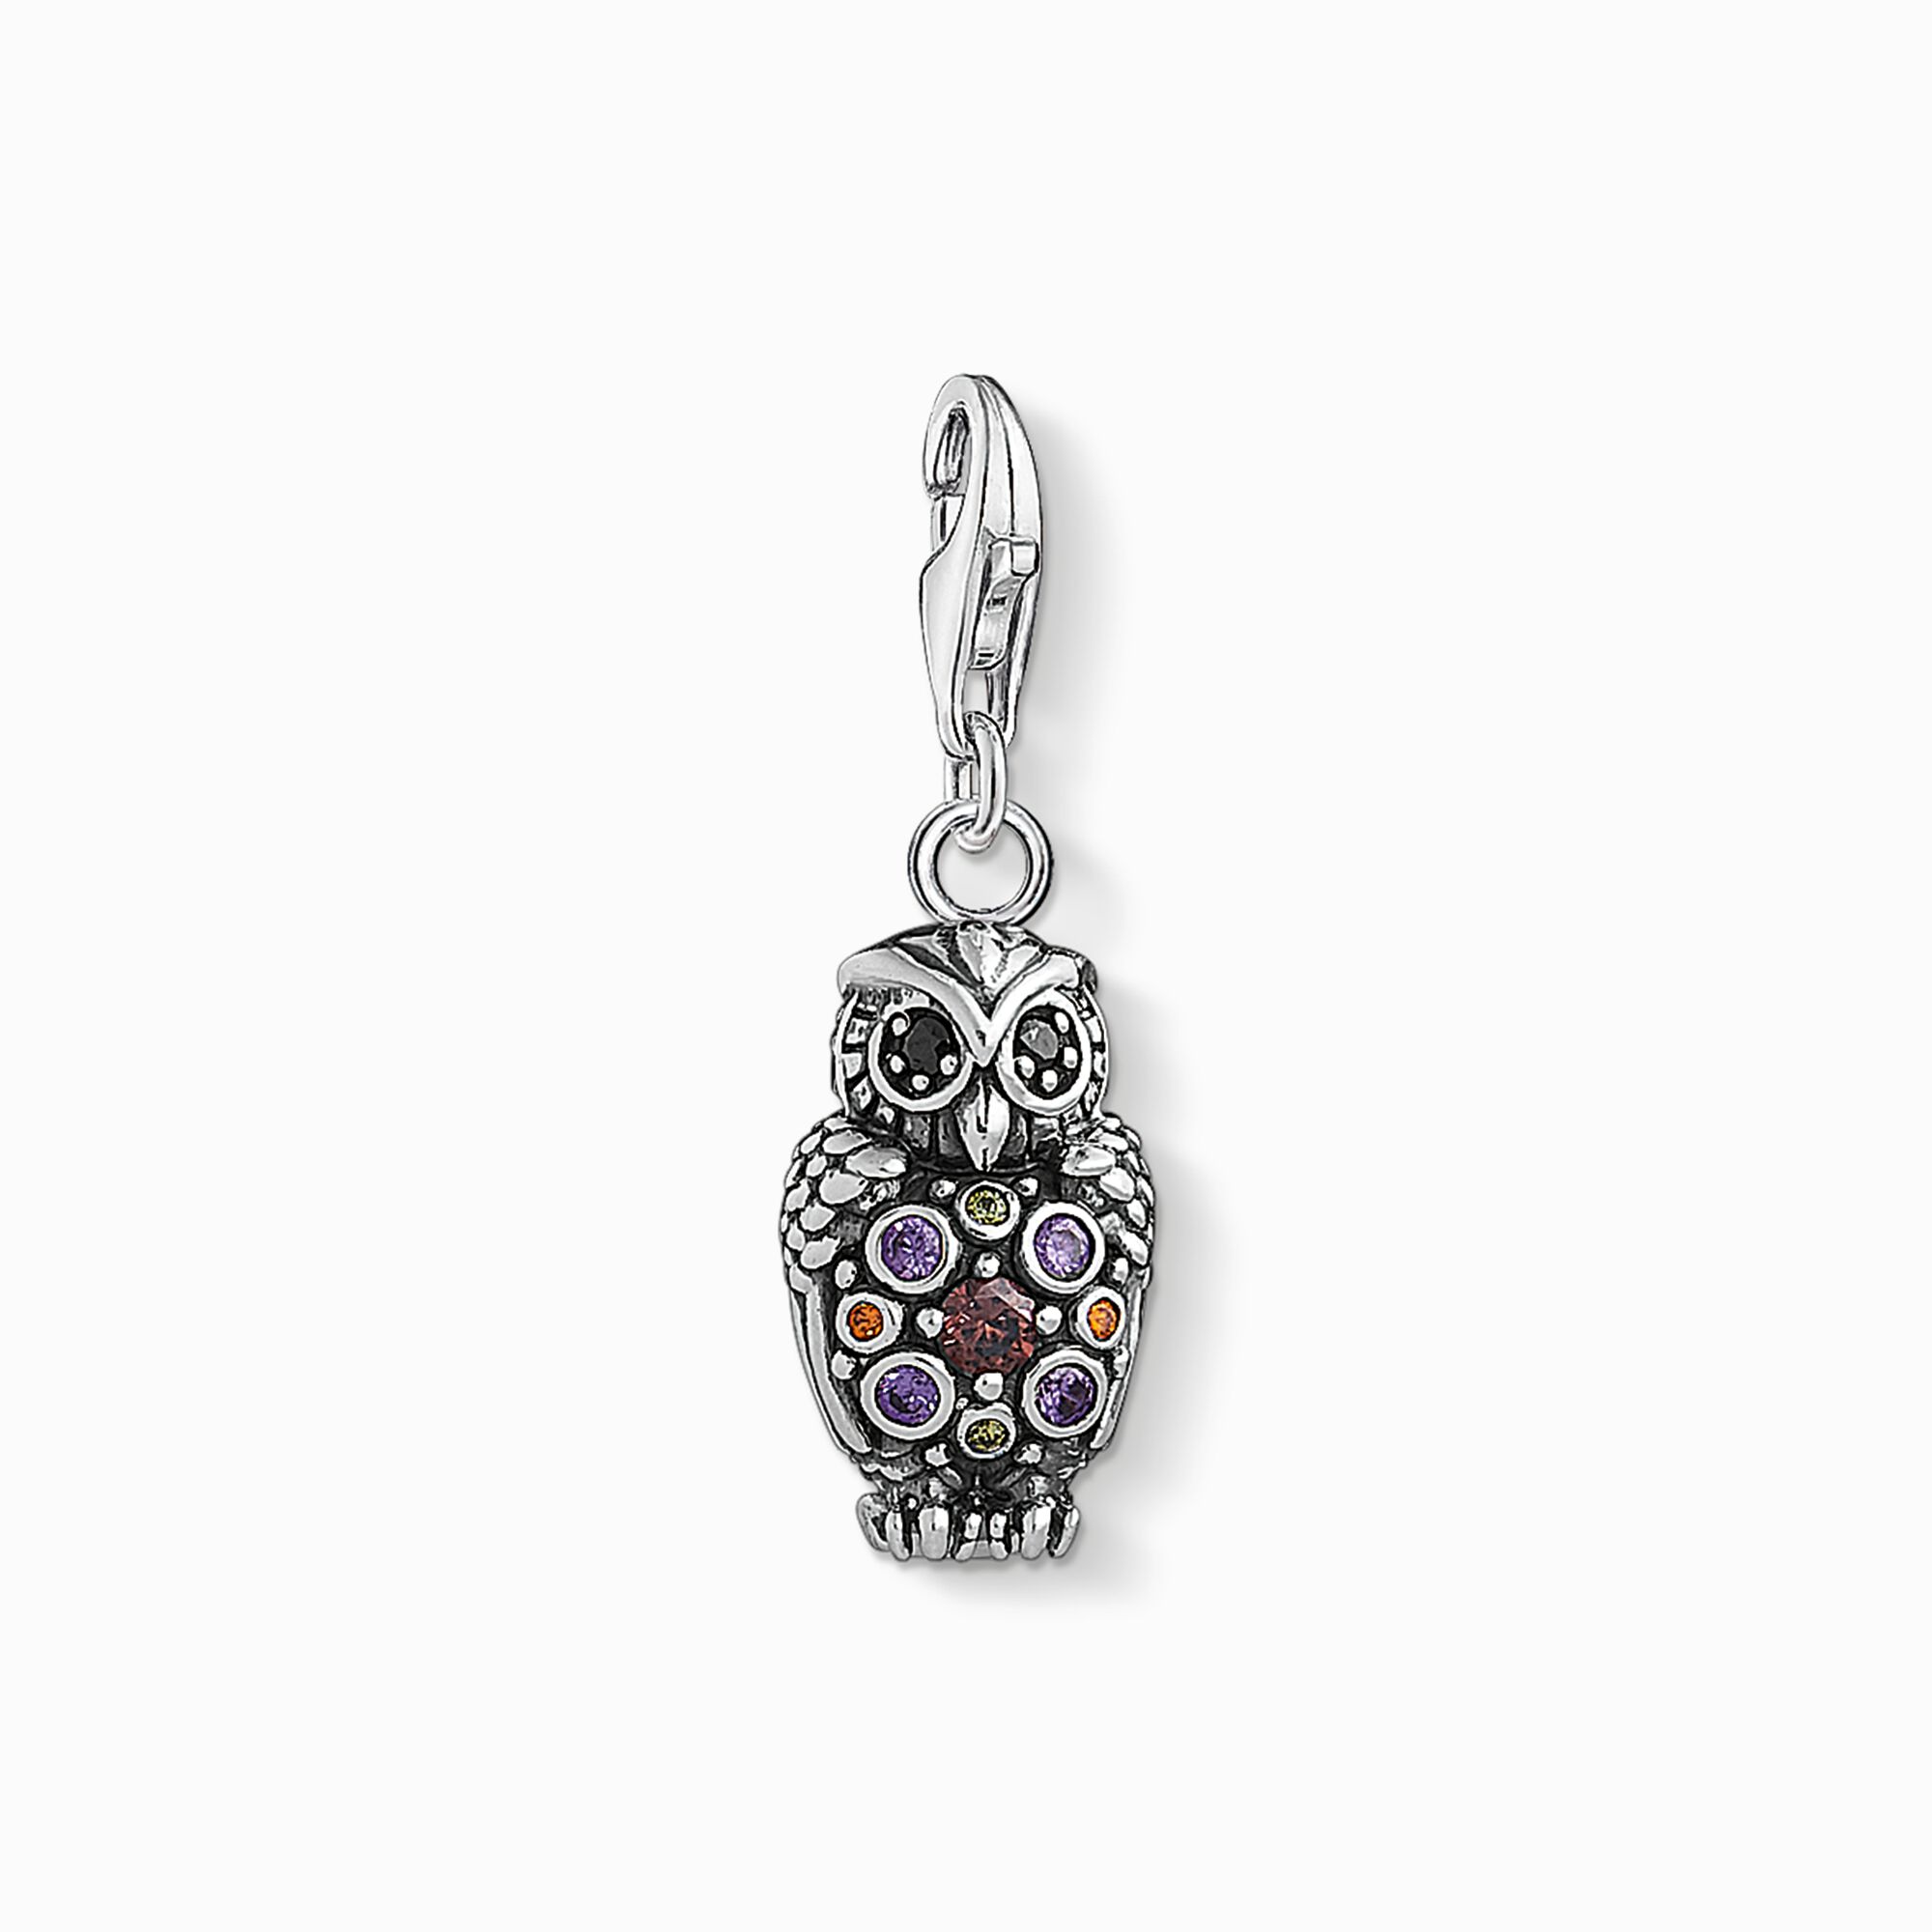 Charm pendant Sparkling owl from the Charm Club collection in the THOMAS SABO online store